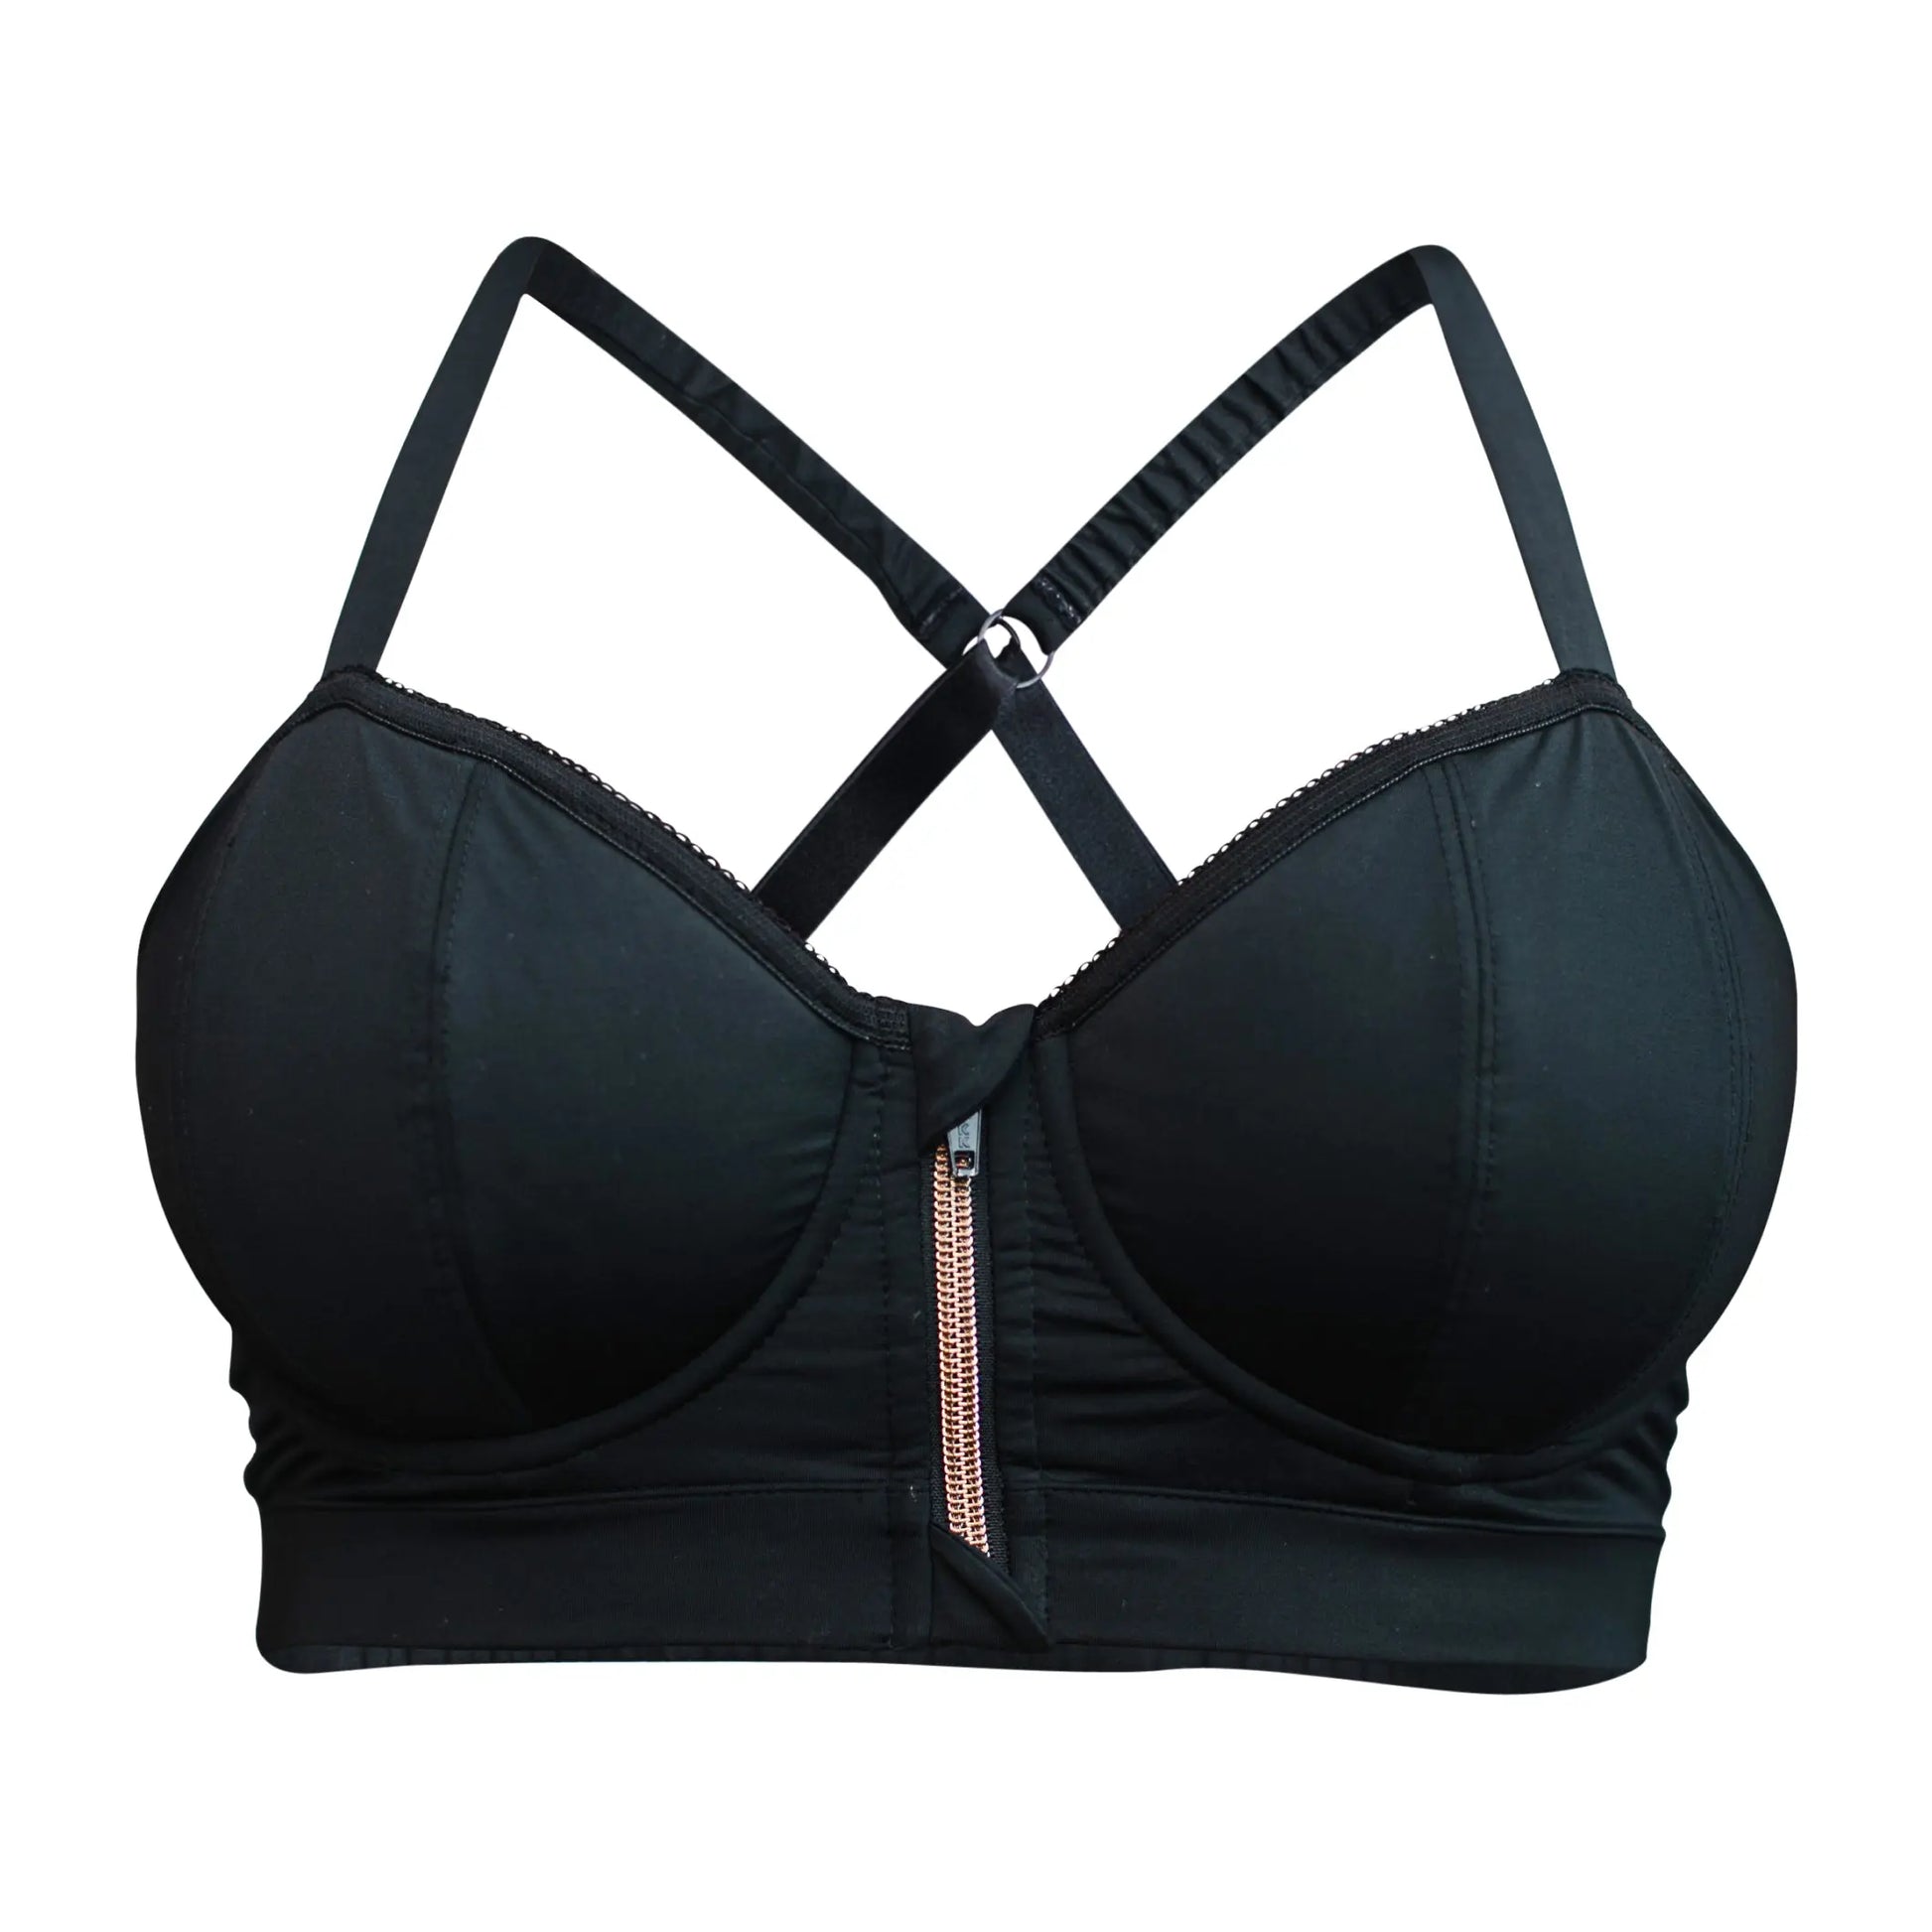 WILDRAX Balconette Sports Bra for daily comfort and active lifestyle